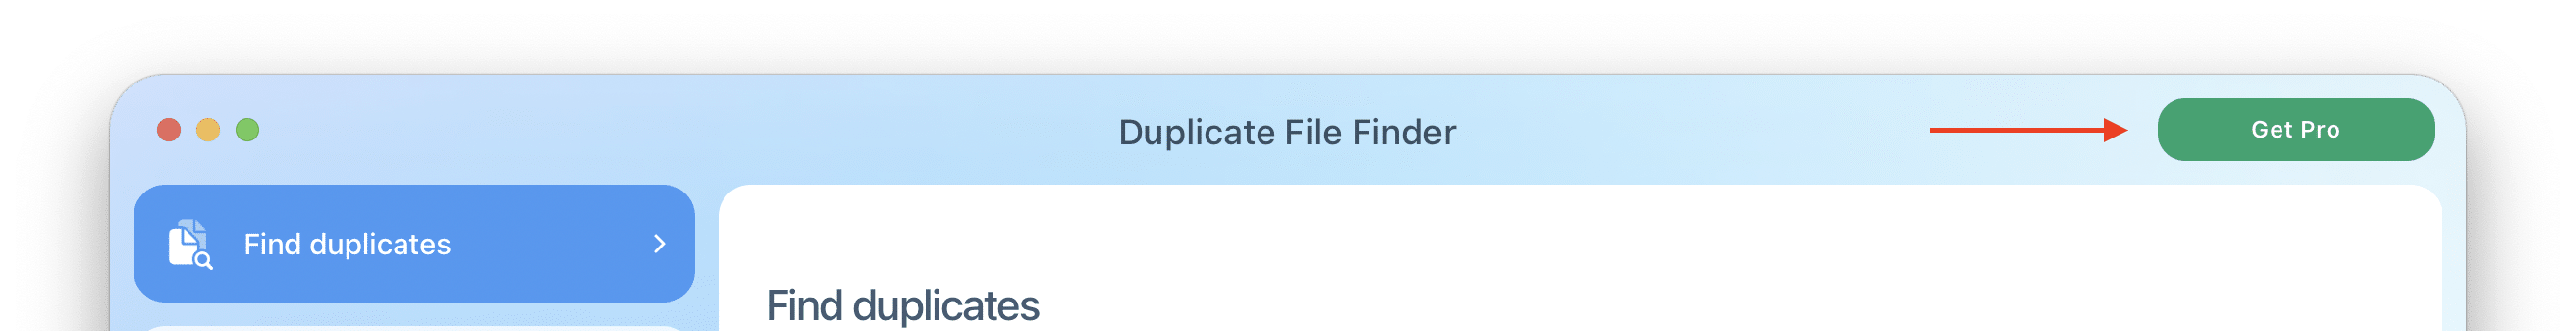 Duplicate File Finder showing the Get Pro button